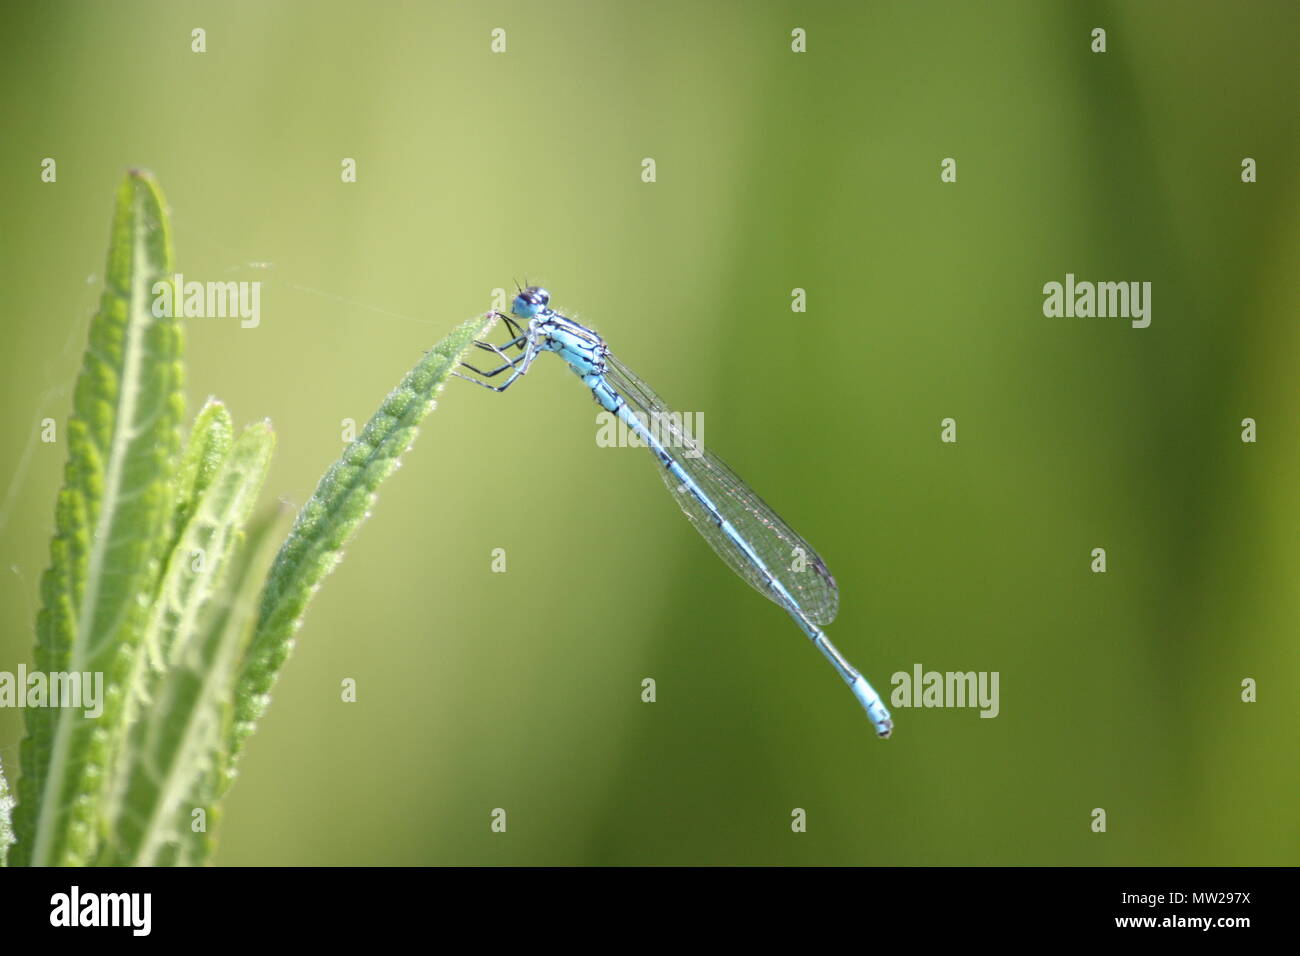 Blue dragonfly sitting on a green leaf Stock Photo